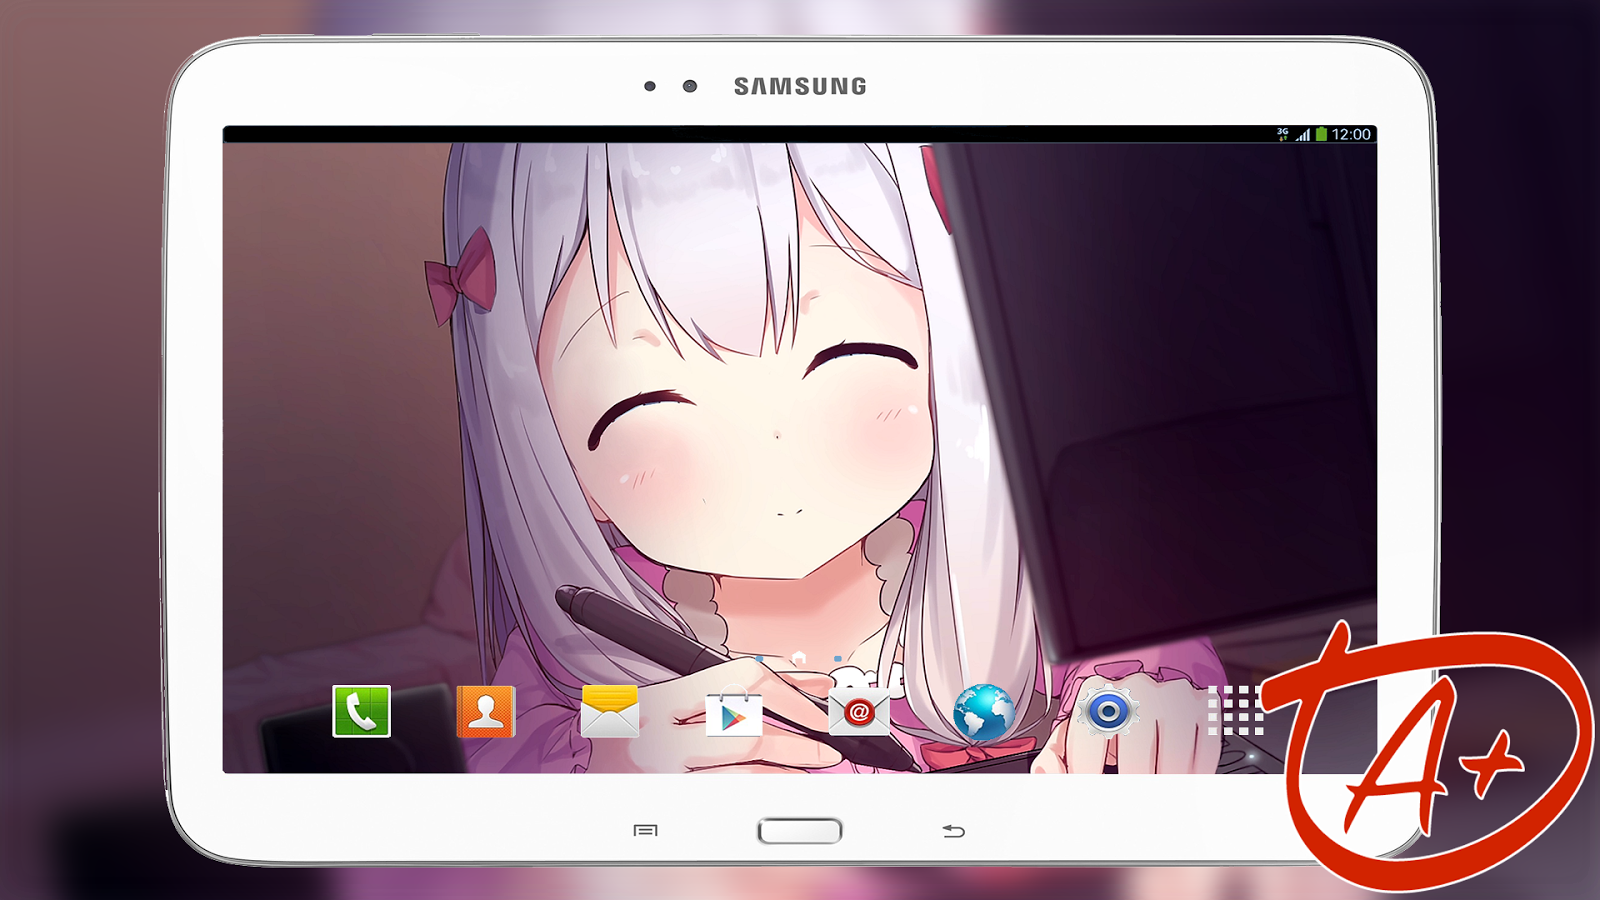 Cute Anime Girl Live Wallpaper Android Apps On Google Play